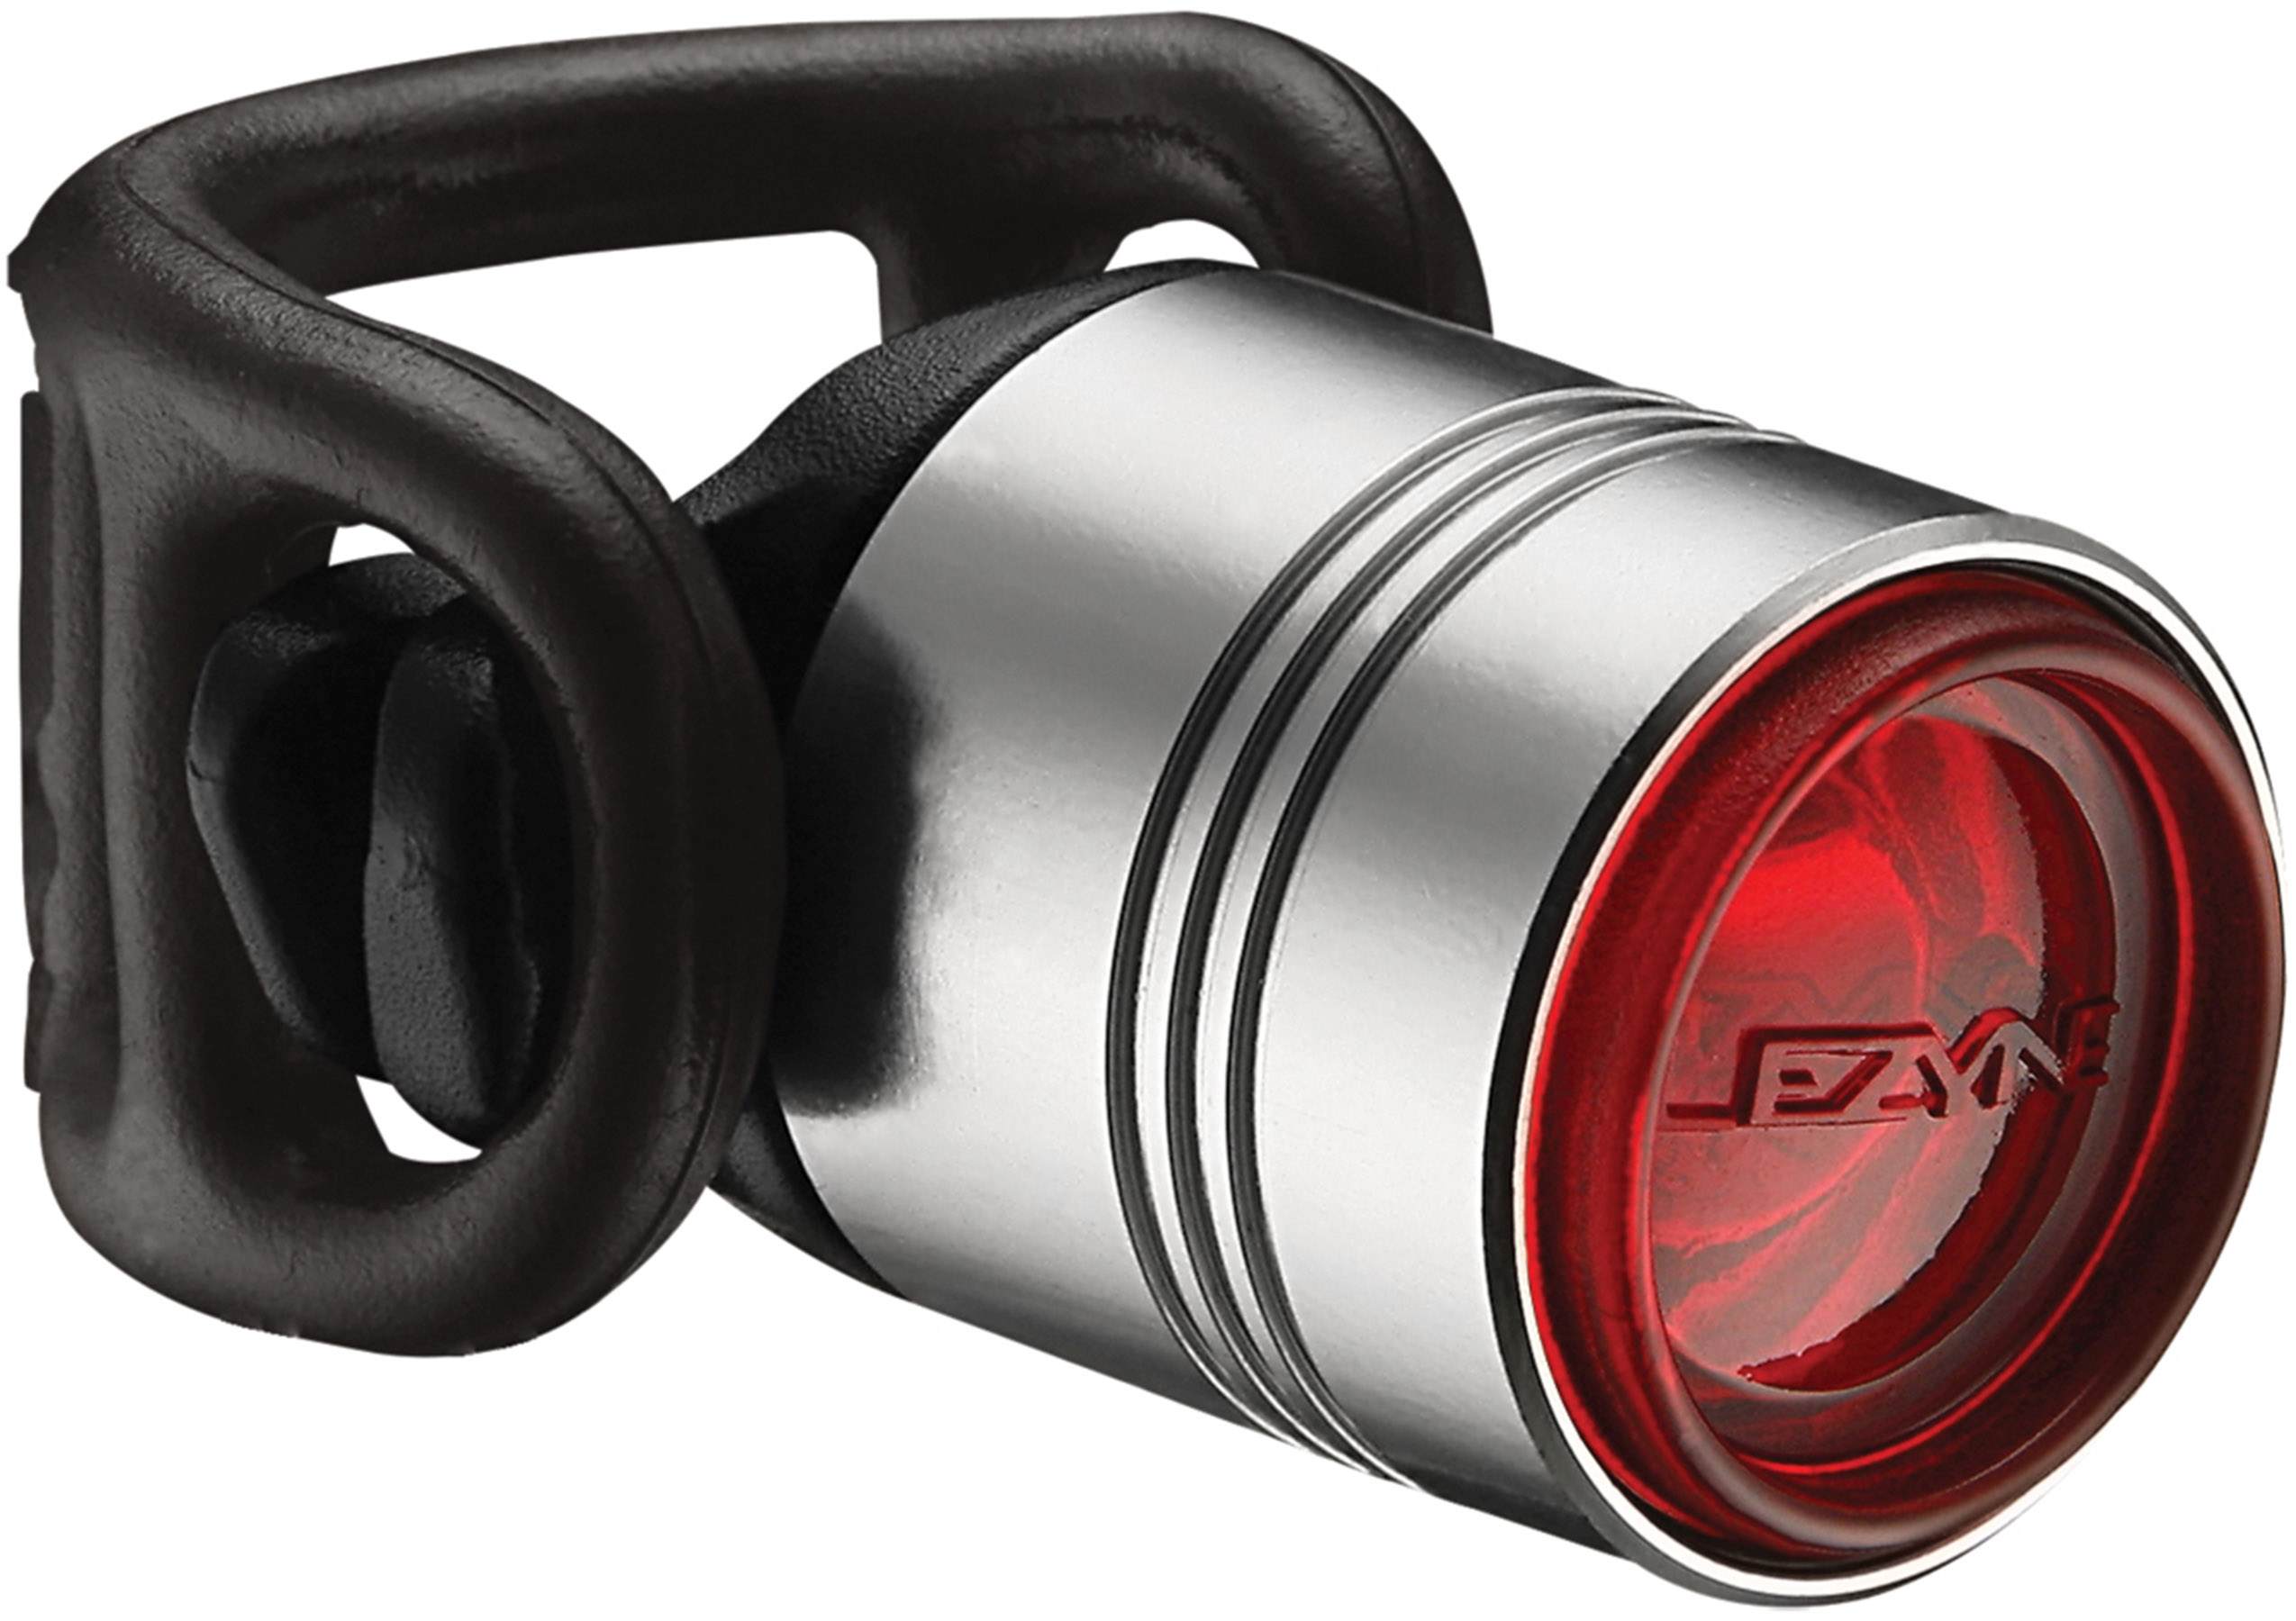 Rear bicycle light